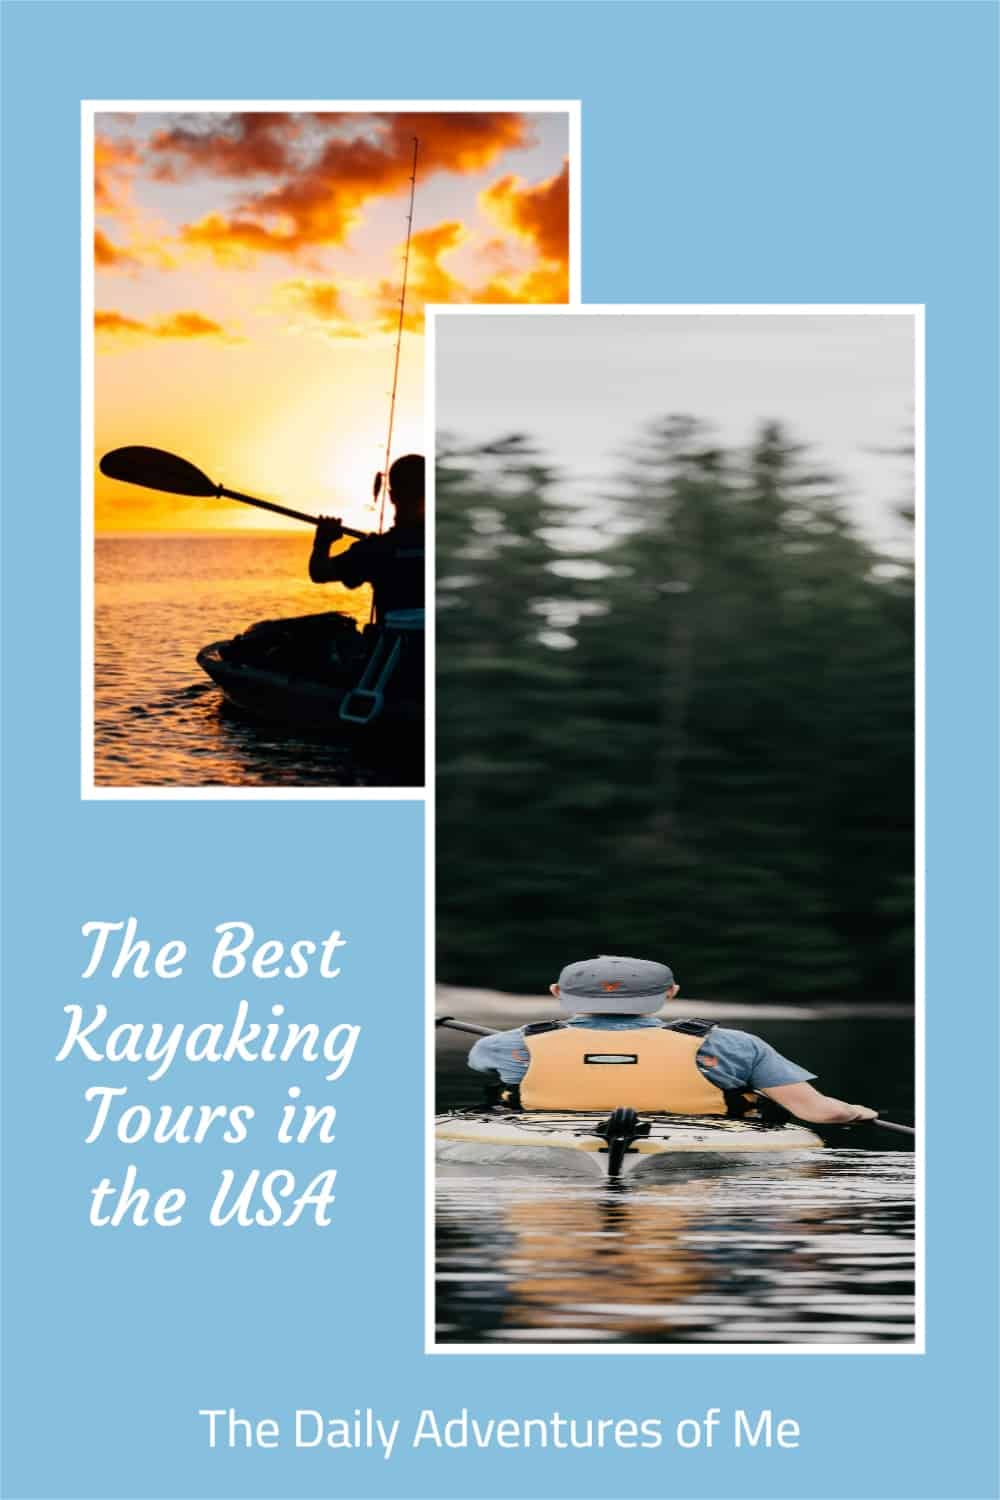 Canyons in Arizona, gem-colored islands of Washington state, or the mangrove forests in Florida- which kayak tour in the US floats your boat? Read on for details on fabulous US kayaking tours. #kayakingtours #USAtravel #kayaktrips